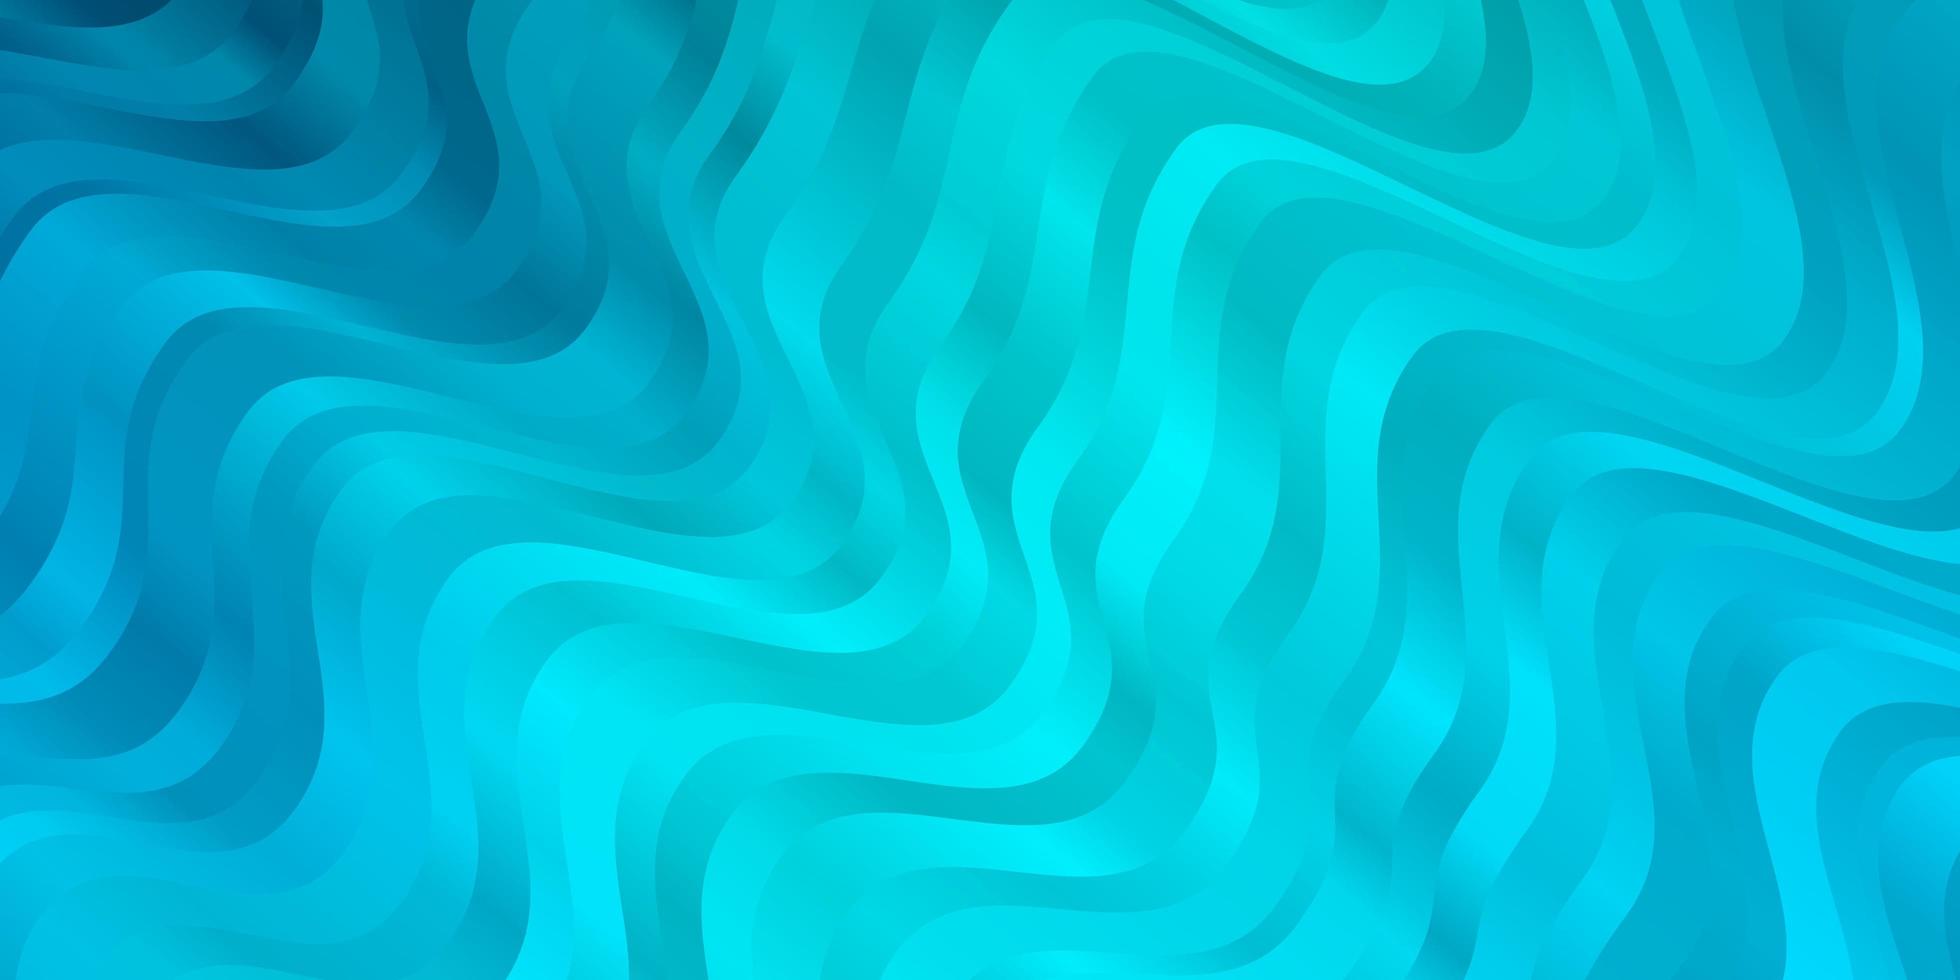 Light blue pattern with curved lines. vector